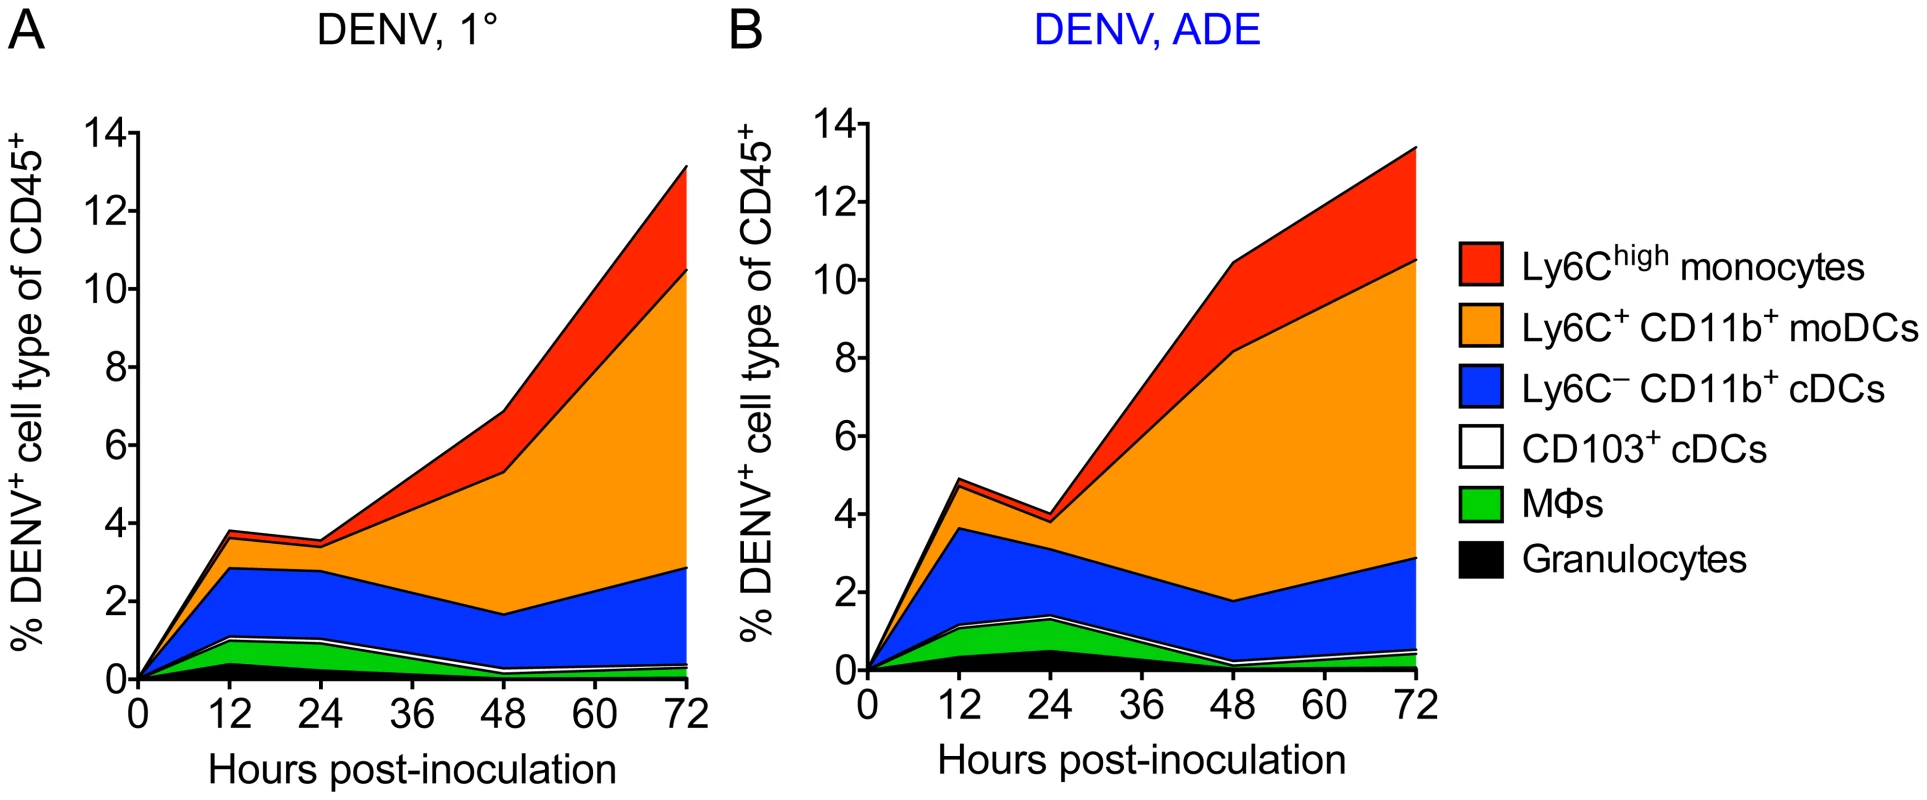 The main targets for DENV infection in the dermis over time.